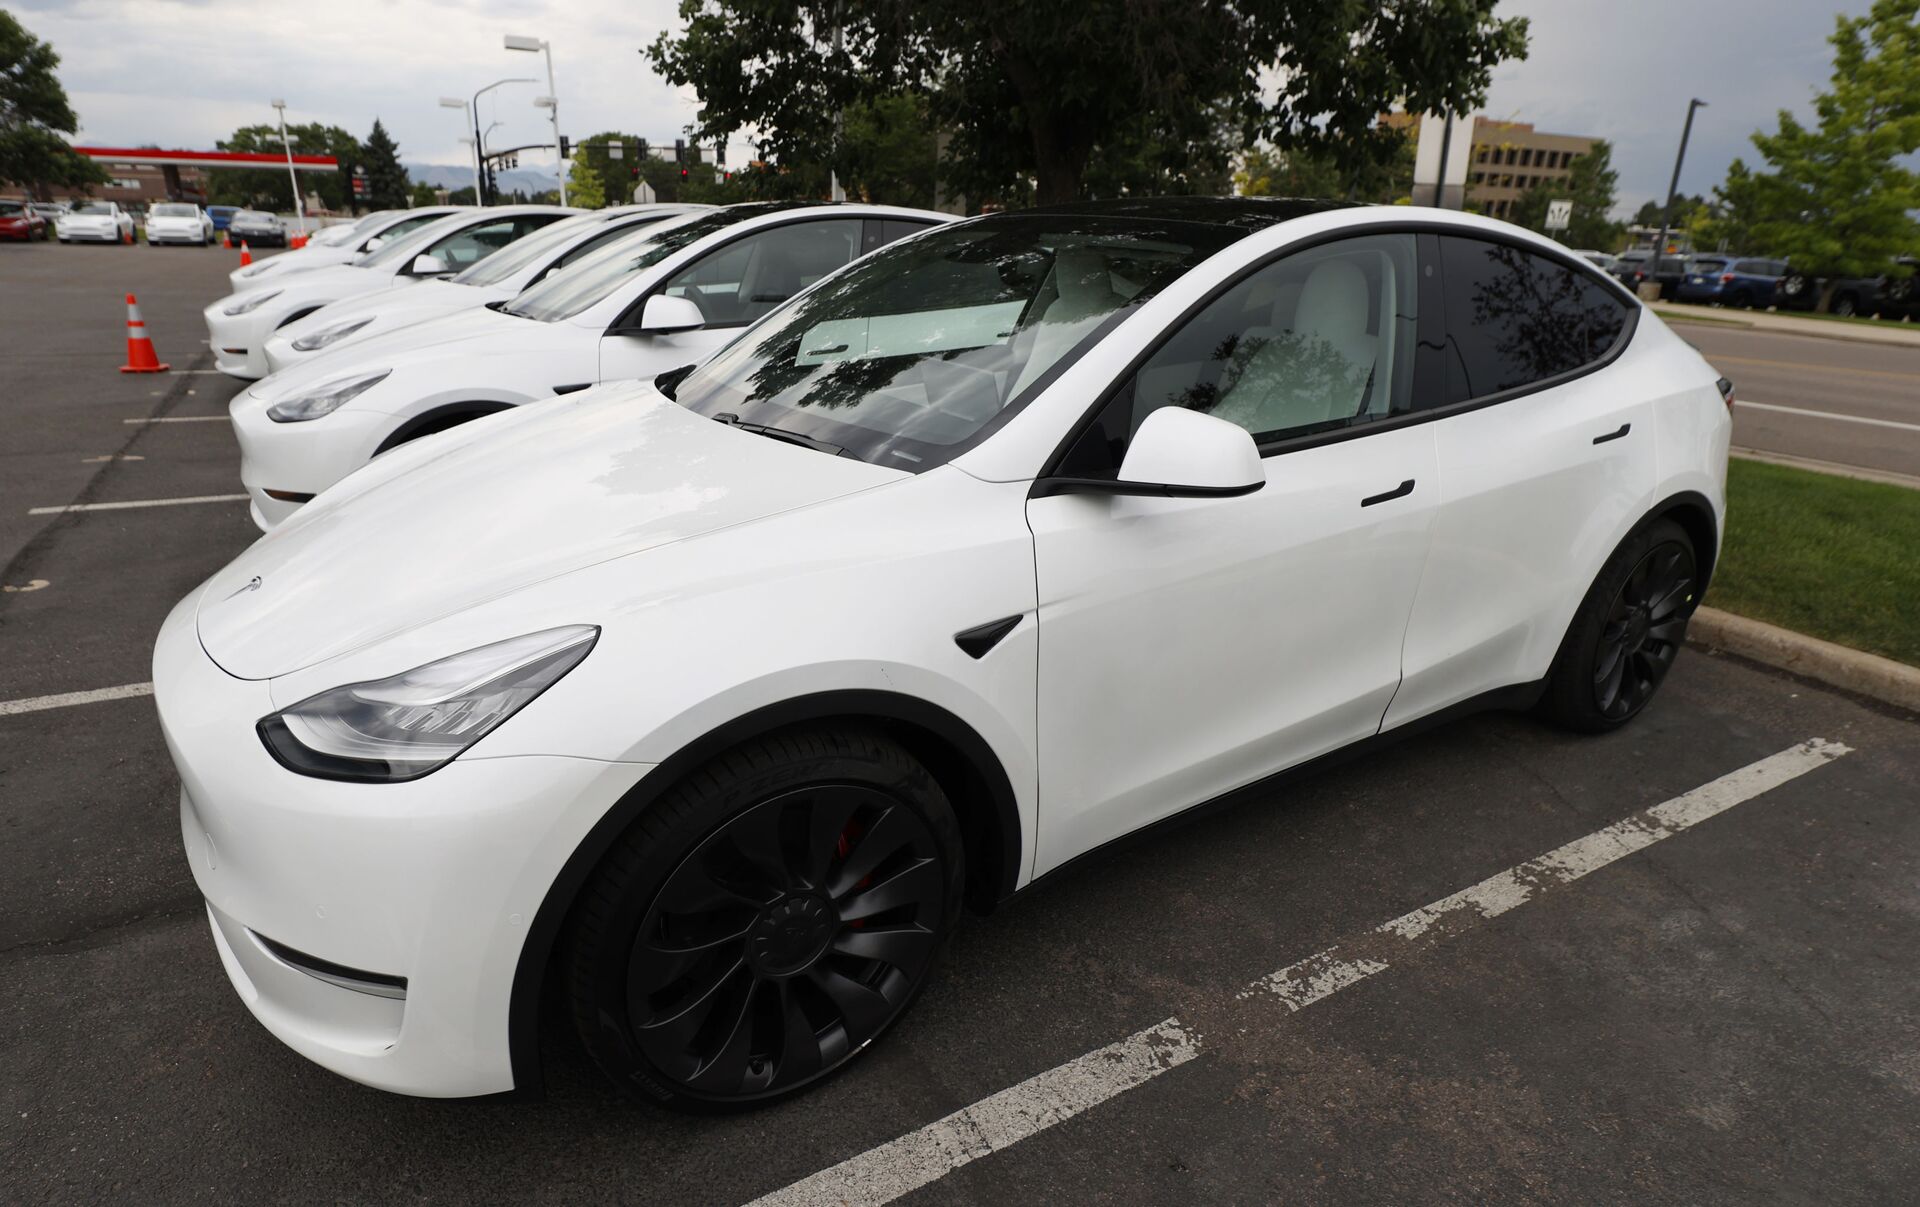 FILE - In this Sunday, June 28, 2020 file photo, 2020 Model Y electric sports-utility vehicles sit in the parking lot of a Tesla store in Littleton, Colo. Tesla overcame a seven-week pandemic-related shutdown at its U.S. assembly plant to post a $104 million net profit for the second quarter. (AP Photo/David Zalubowski) - Sputnik International, 1920, 07.09.2021